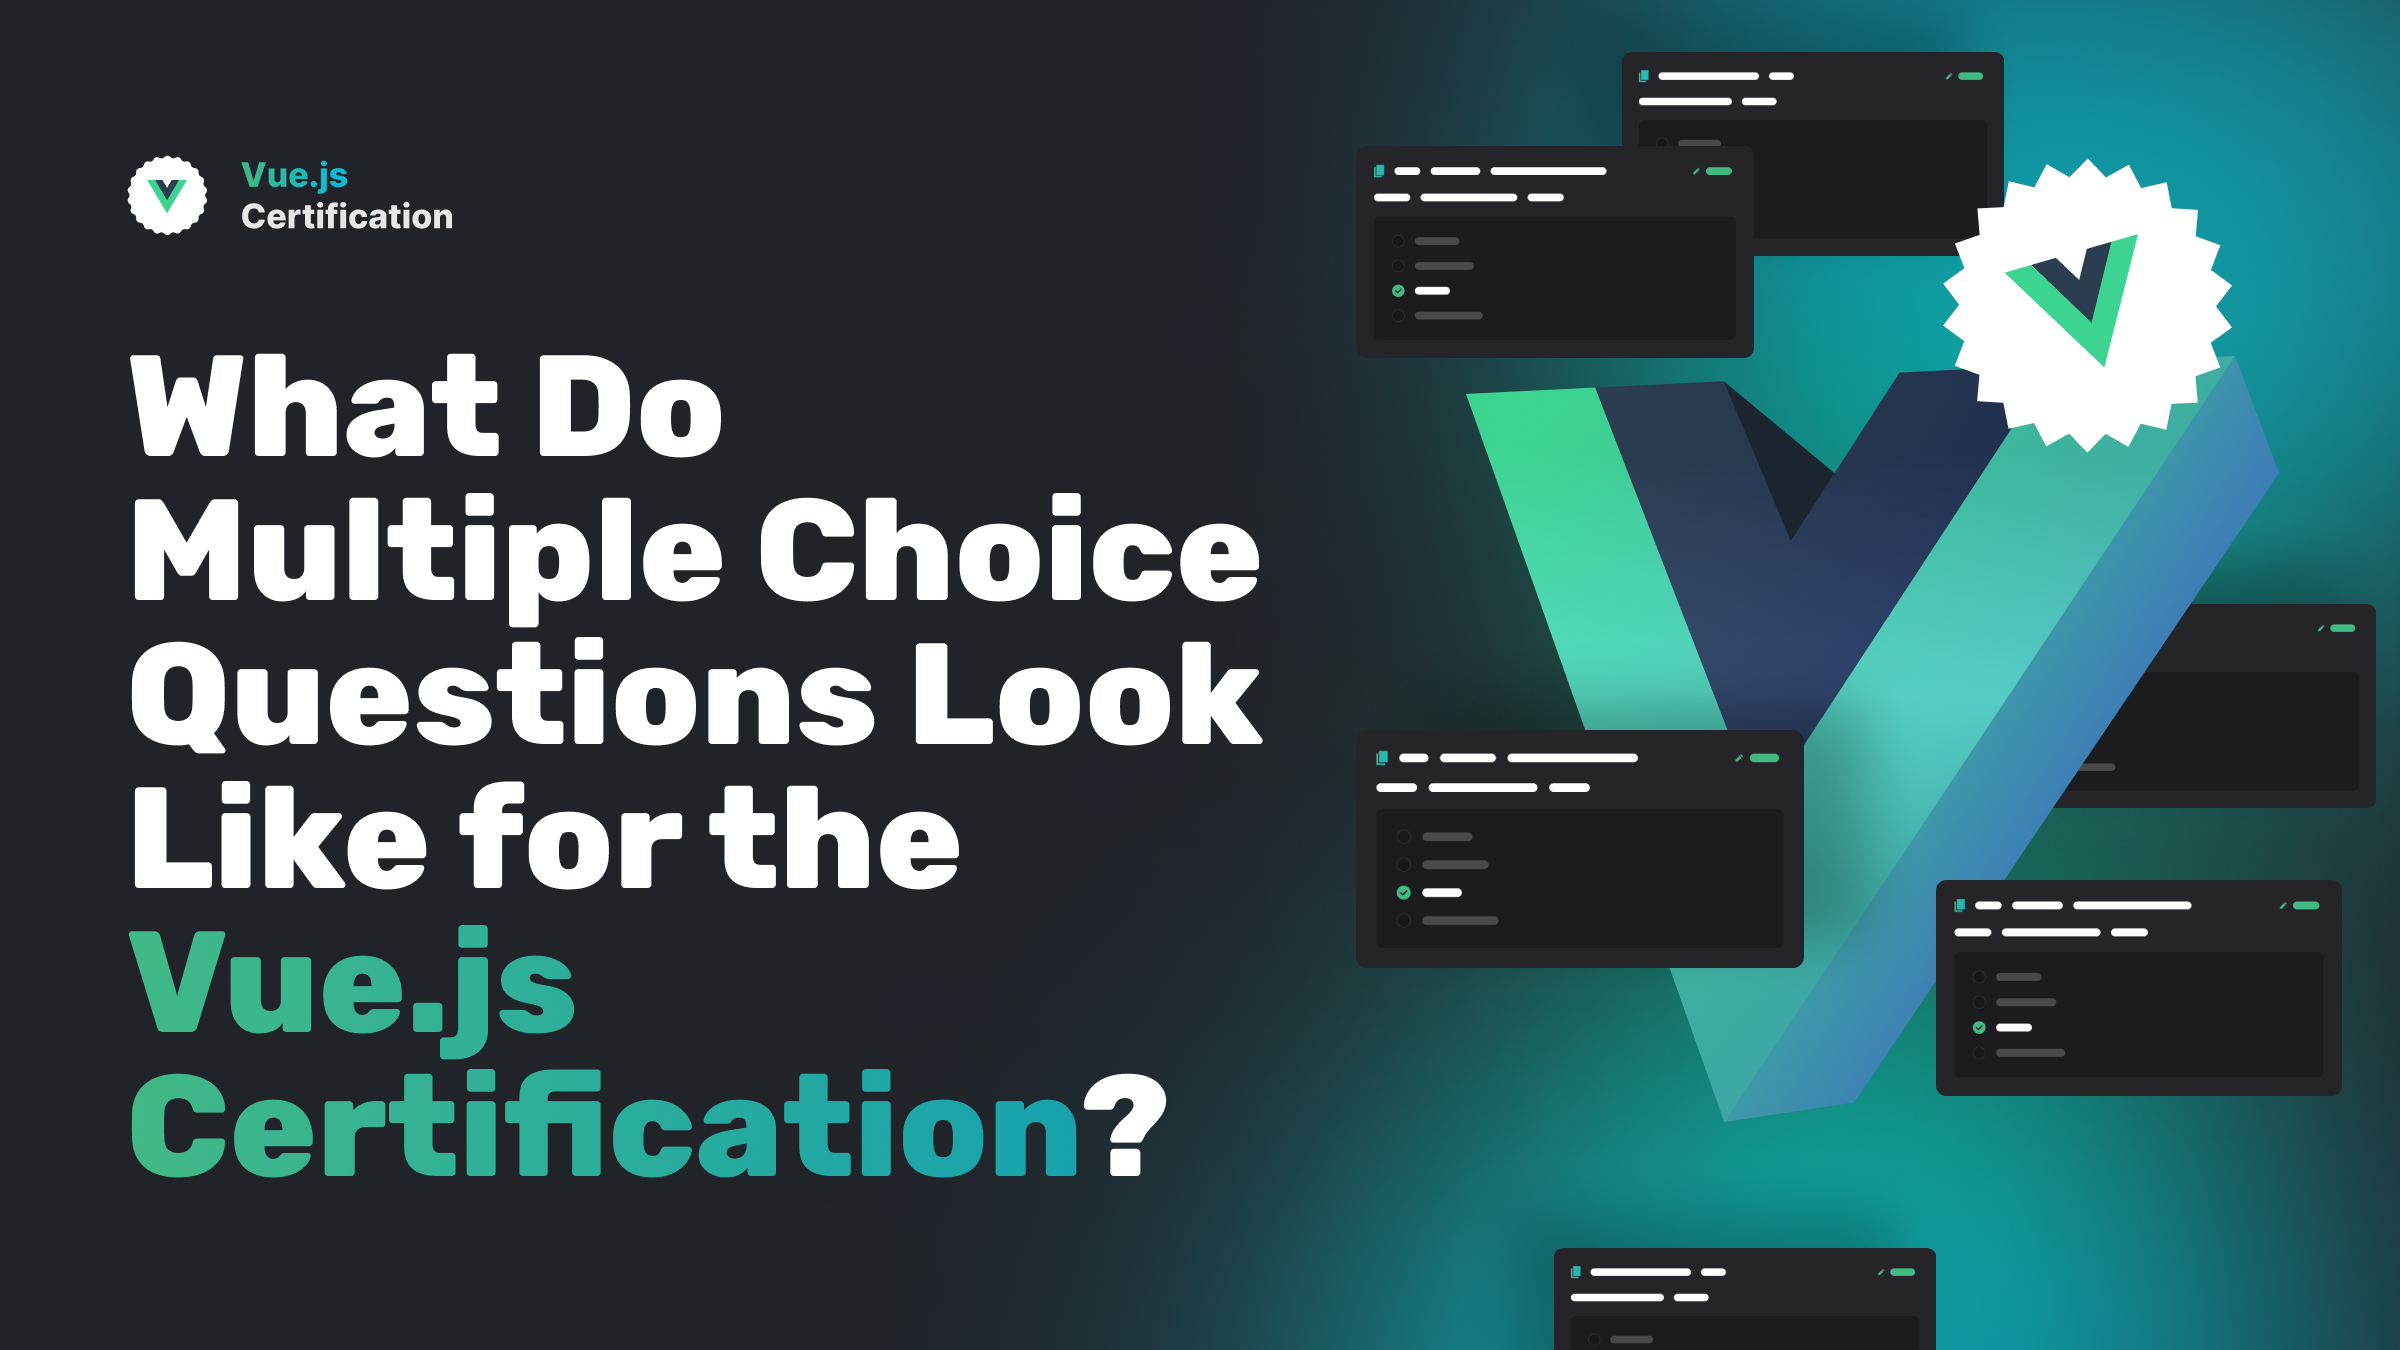 What Do Multiple Choice Questions Look Like for the Vue.js Certification?